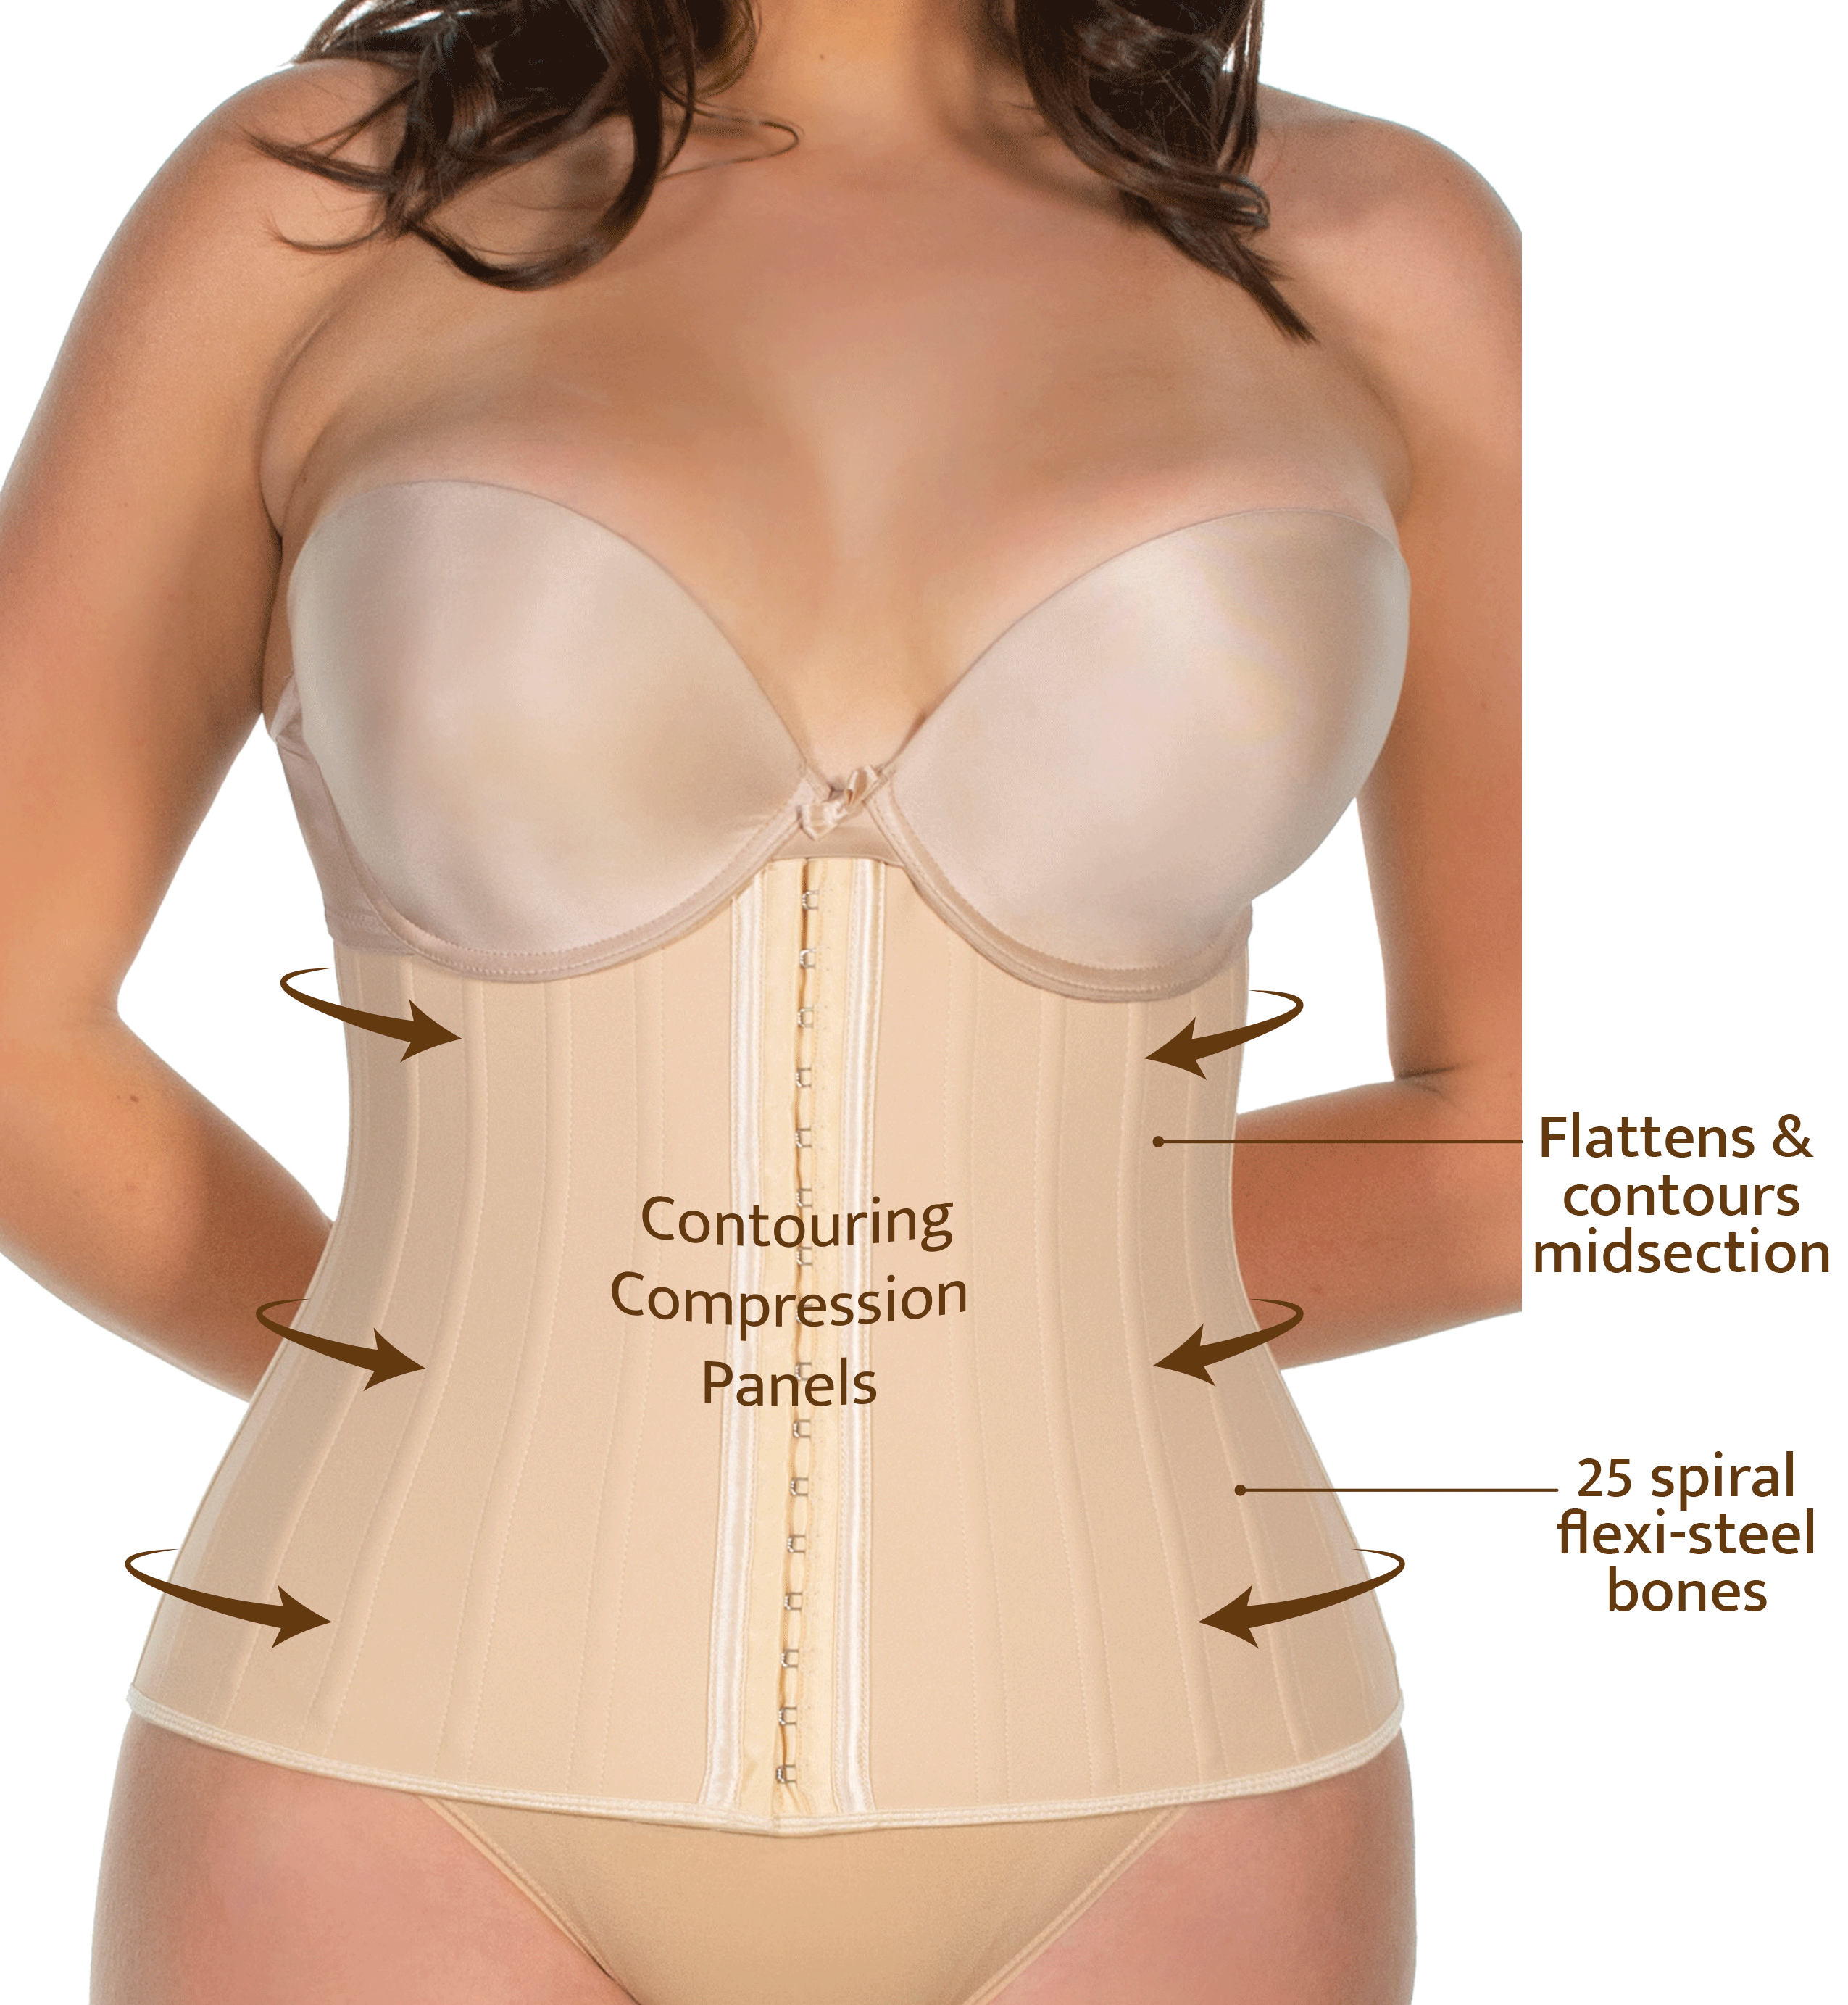 Help! Fitting? : r/corsets